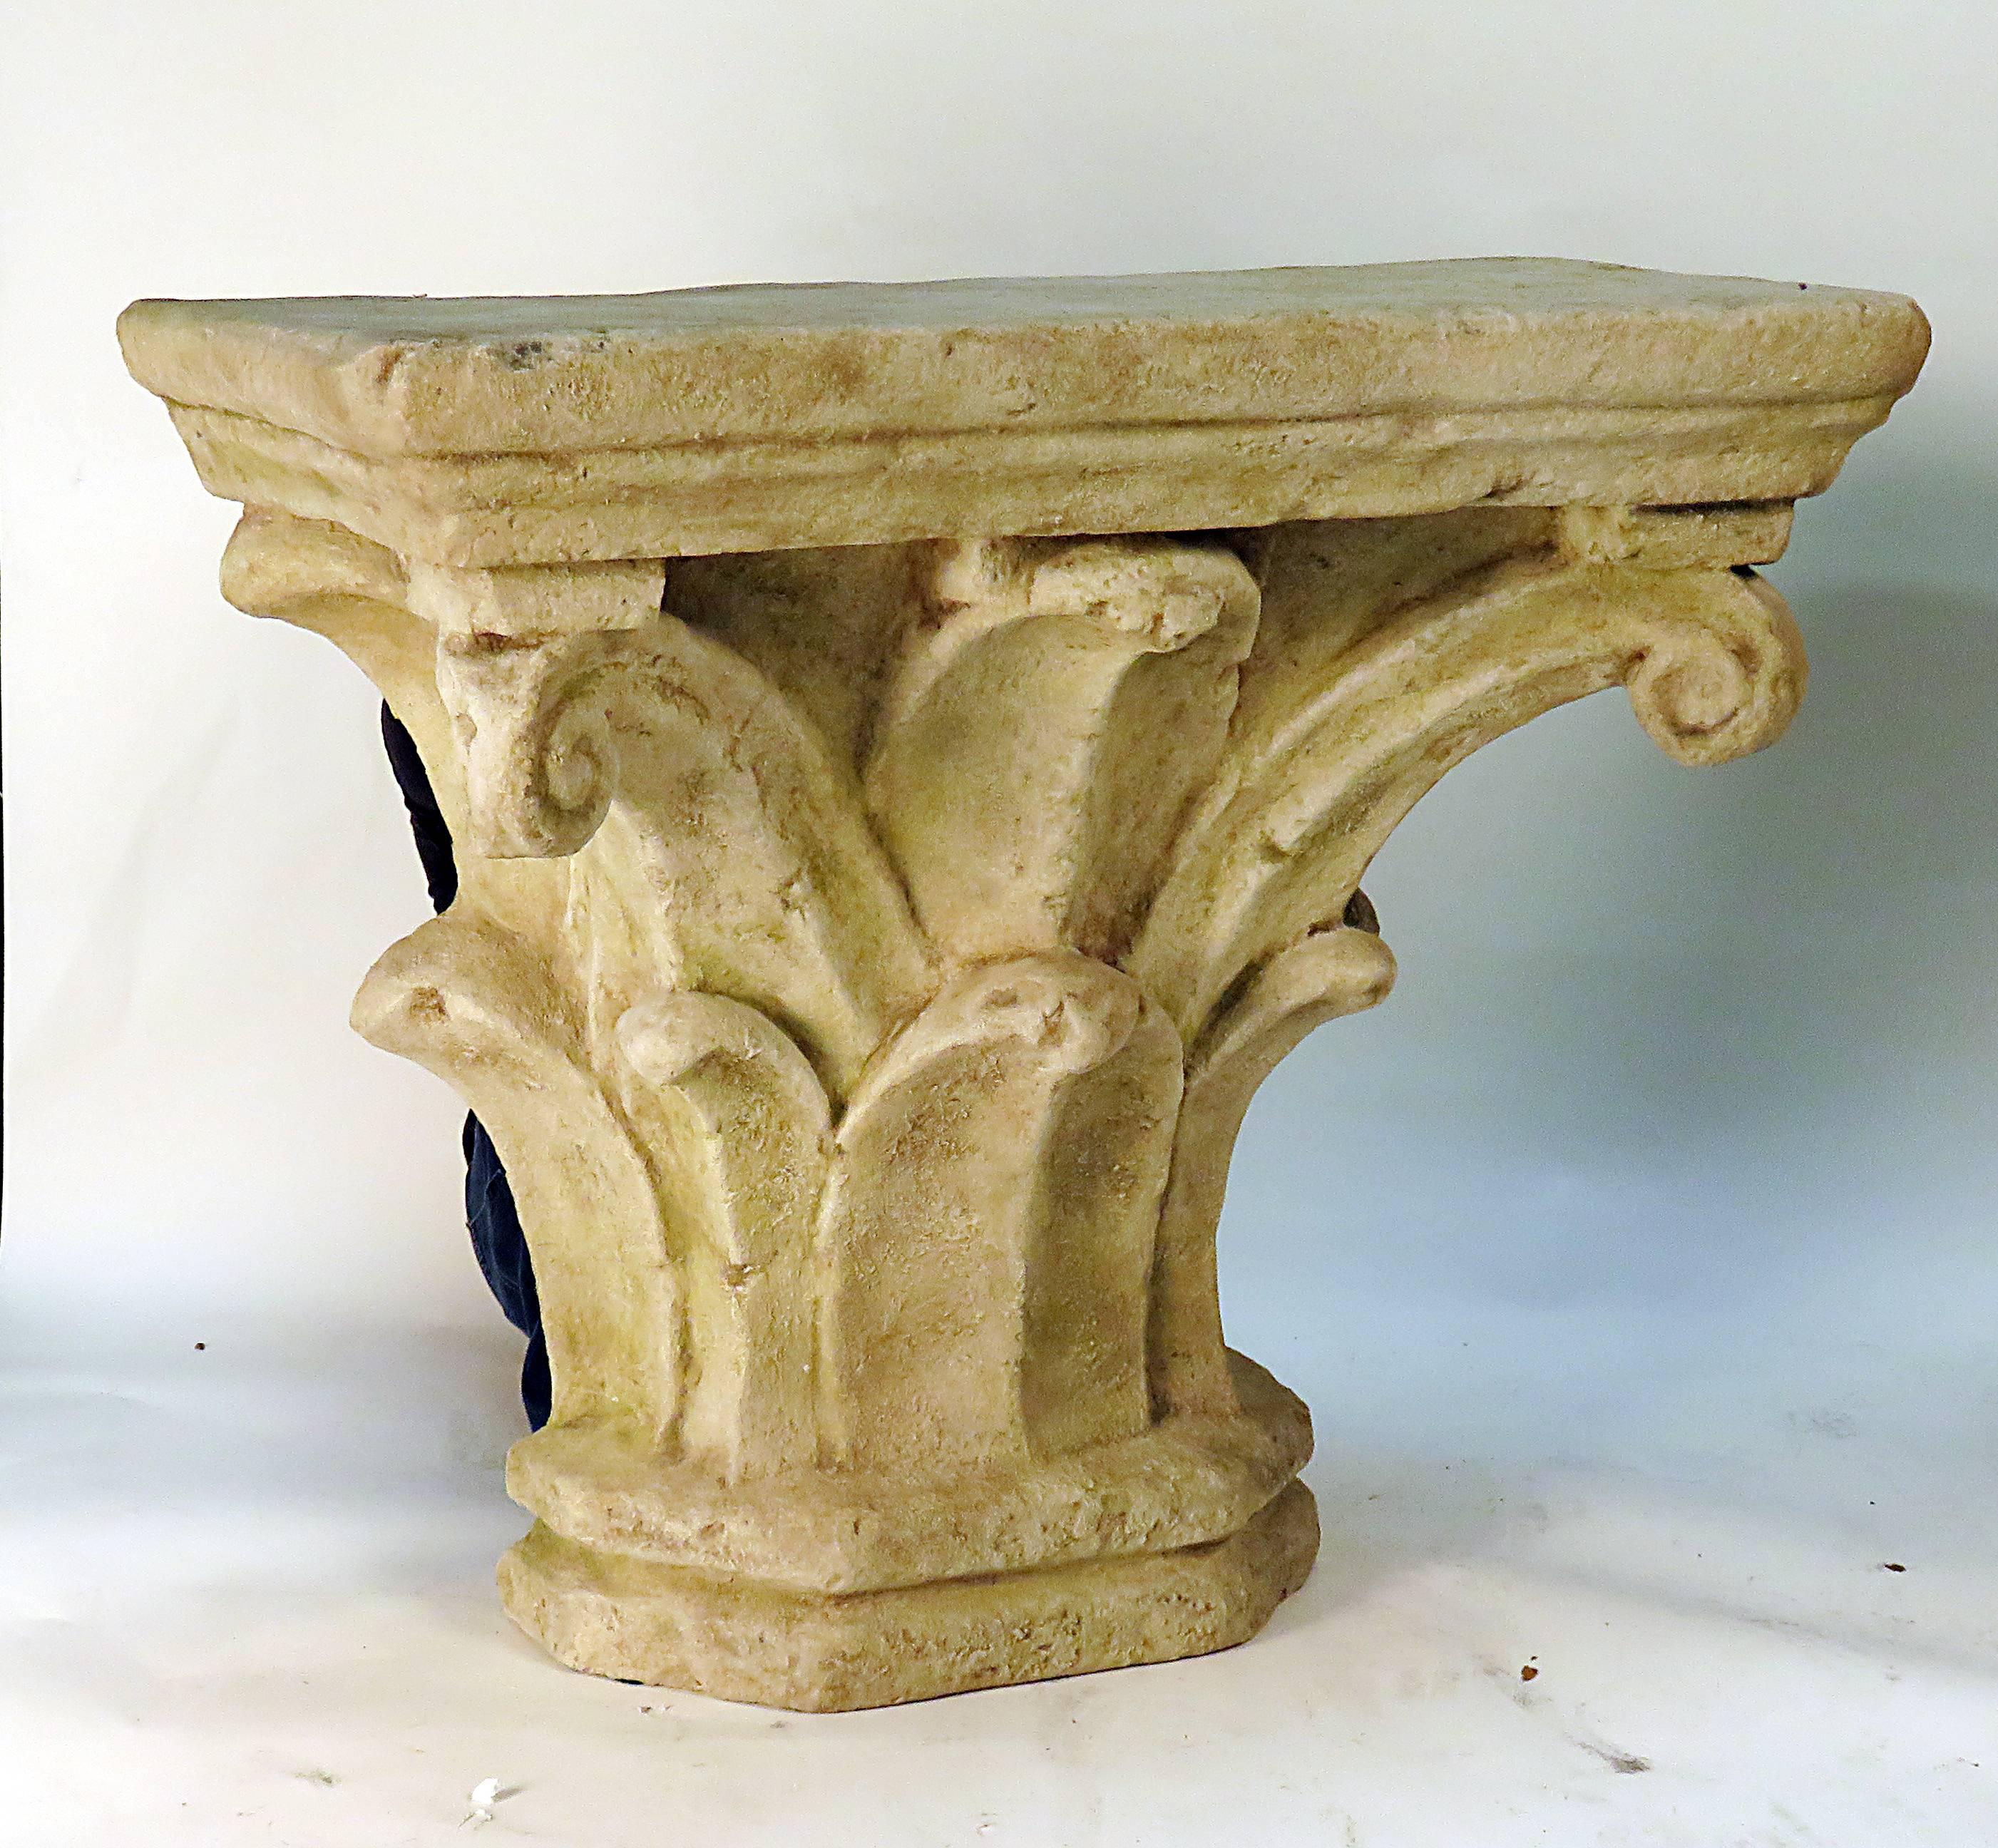 A chic cast stone console table designed and sold by Michael Taylor from the 1970s. Inspired by ancient column capitals from ancient Greece and Rome. We don't see these pieces come up on the secondary market as they where always luxury purchases. We